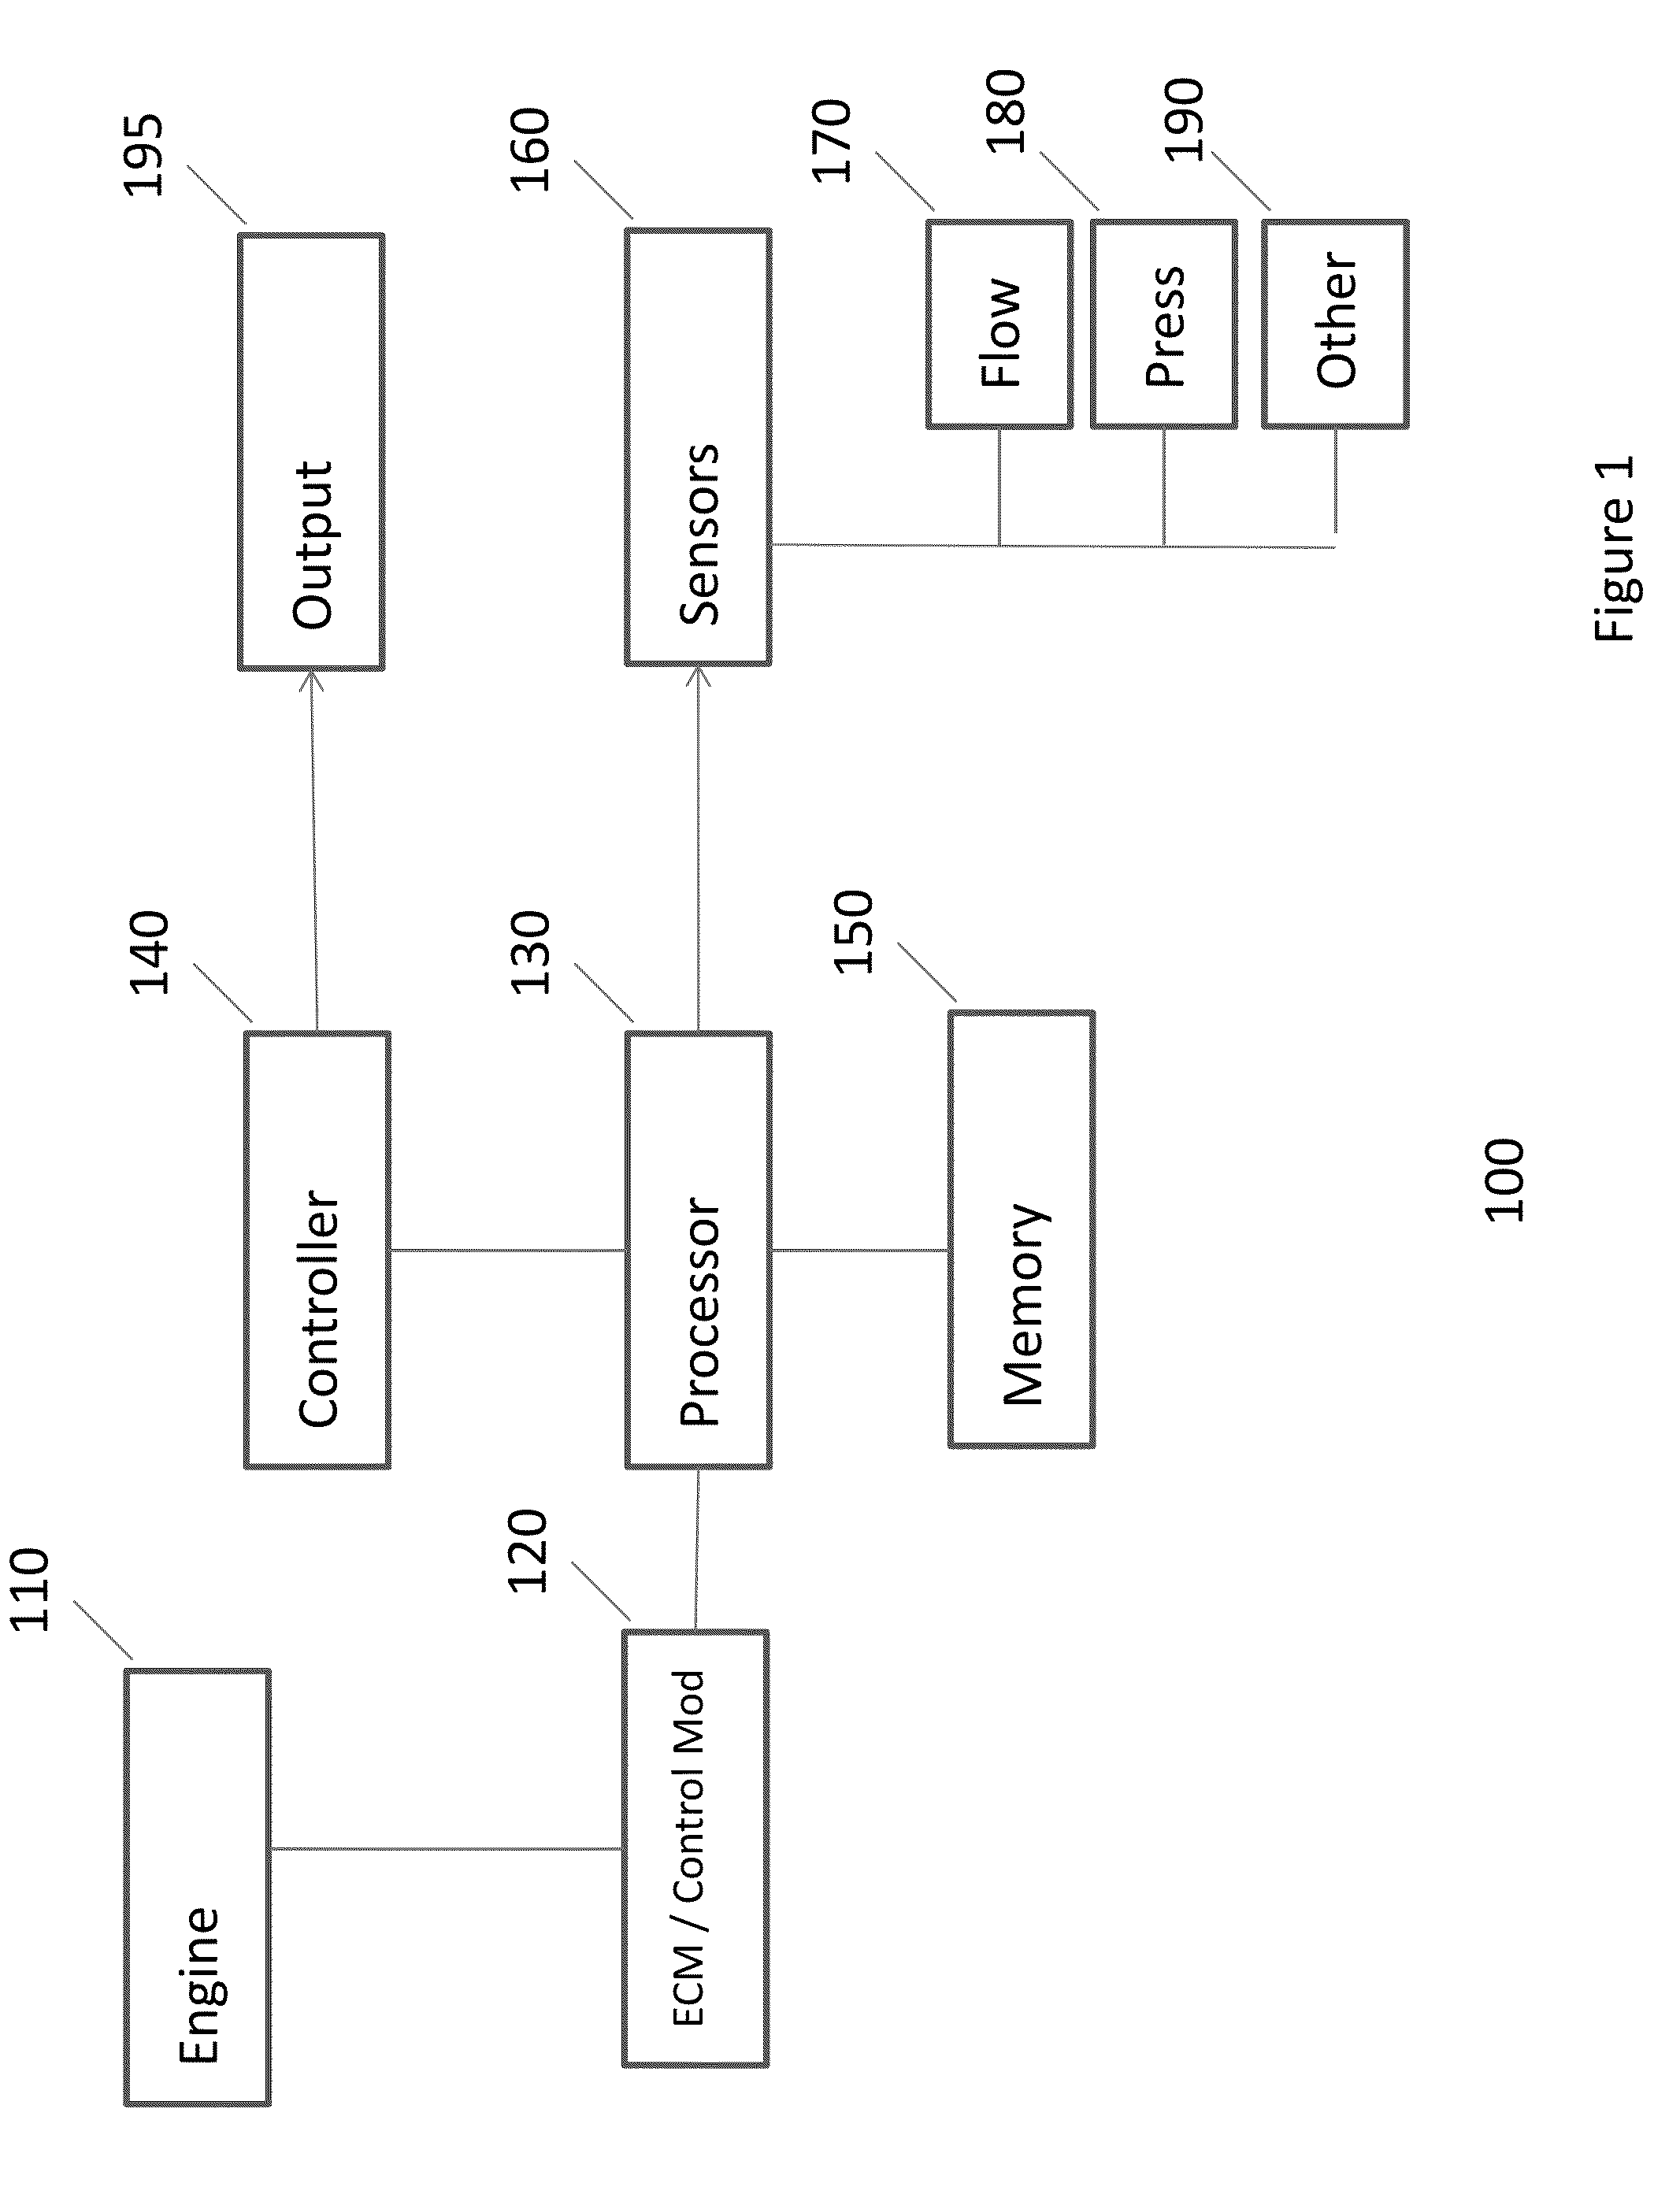 Exhaust manifold pressure based misfire detection for internal combustion engines